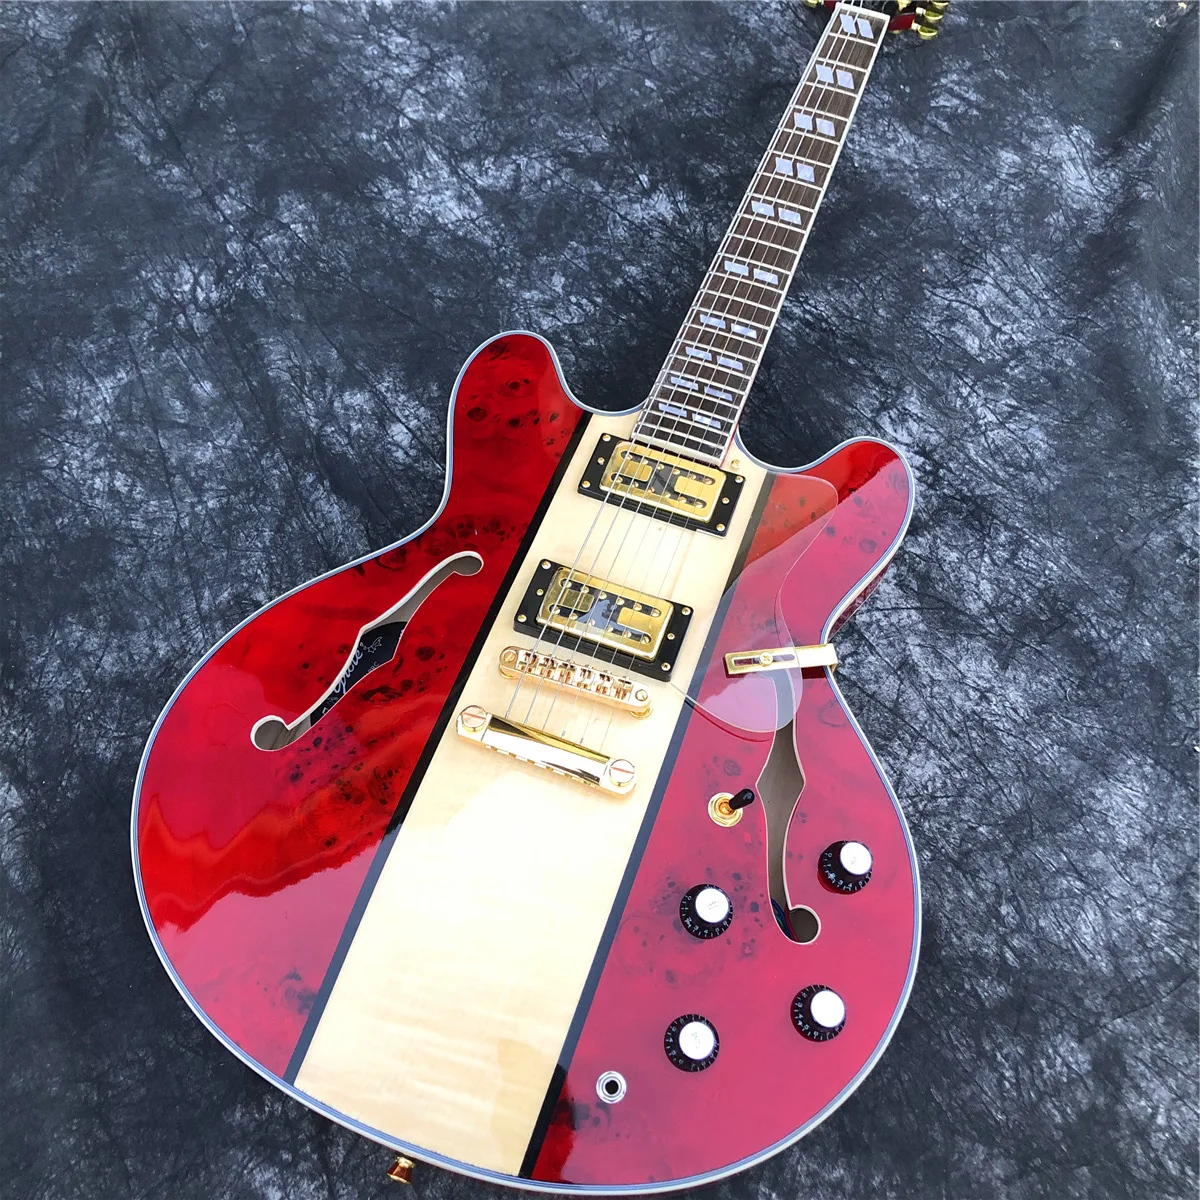 

Grote Semi Hollow Archtop Electric Guitar,Red Color Gloss Finish Gold Hardwares Jazz Guitarra